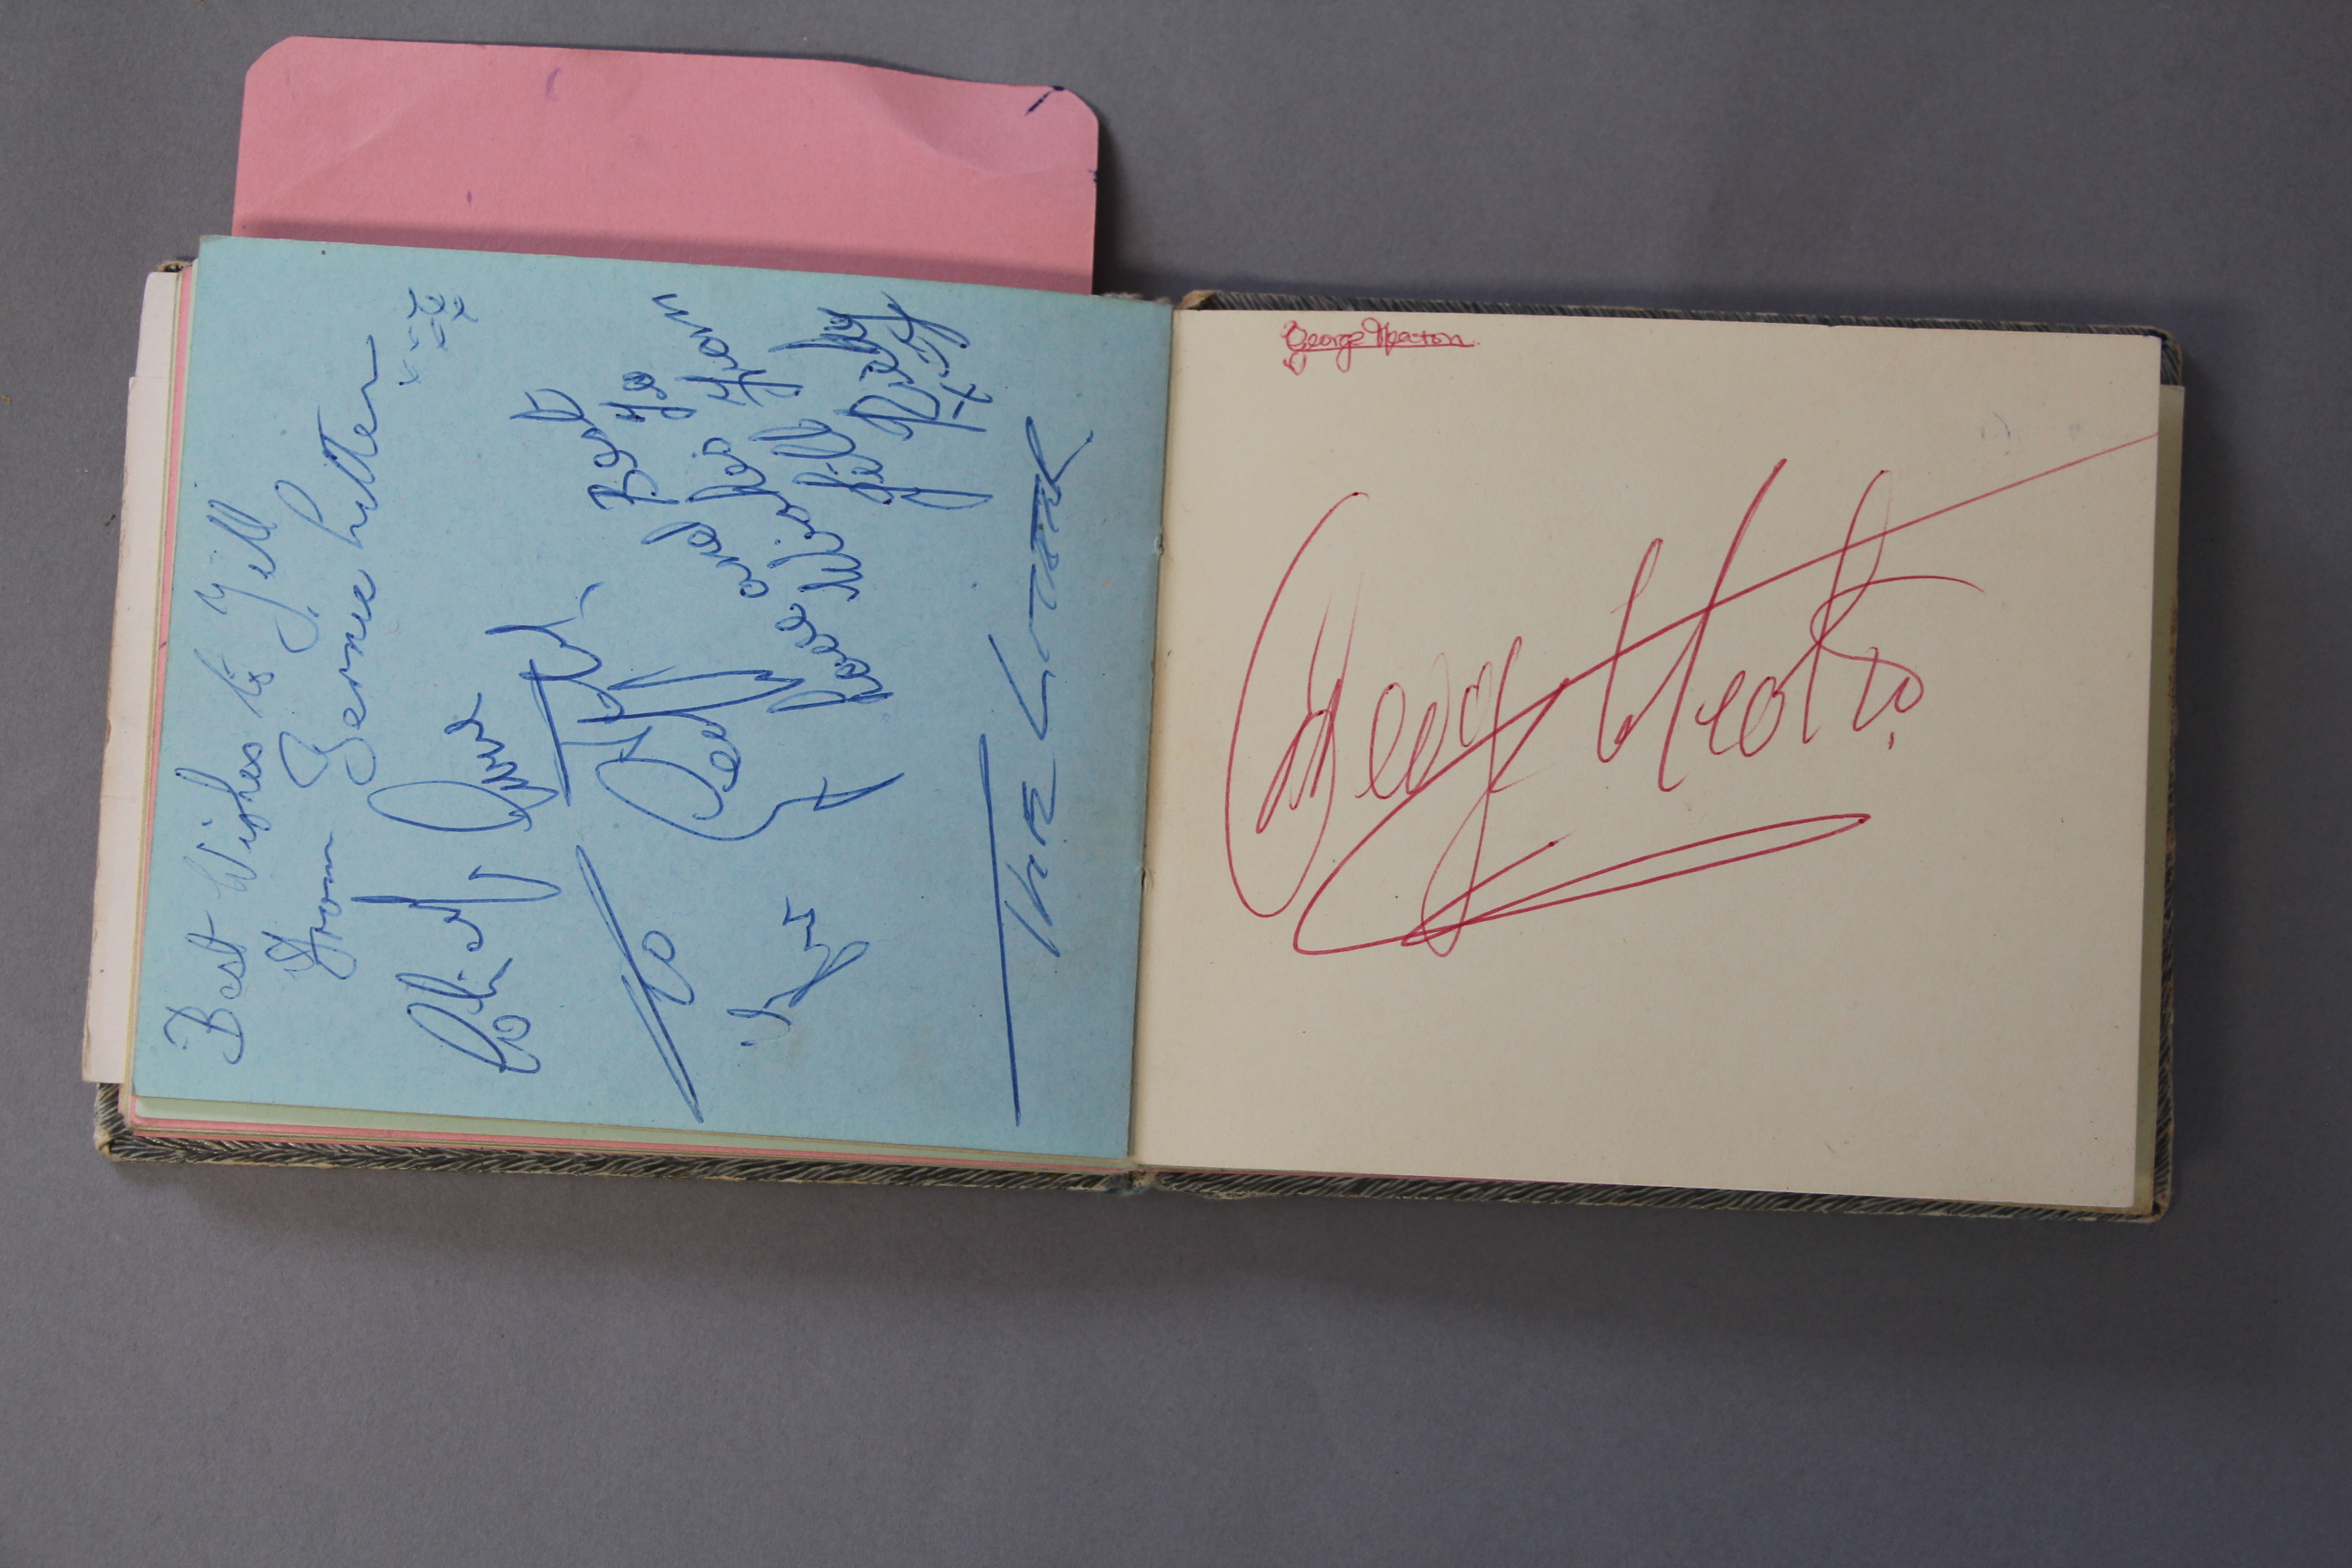 An autograph book with signatures and many car registrations of the groups collected personally by - Image 19 of 22